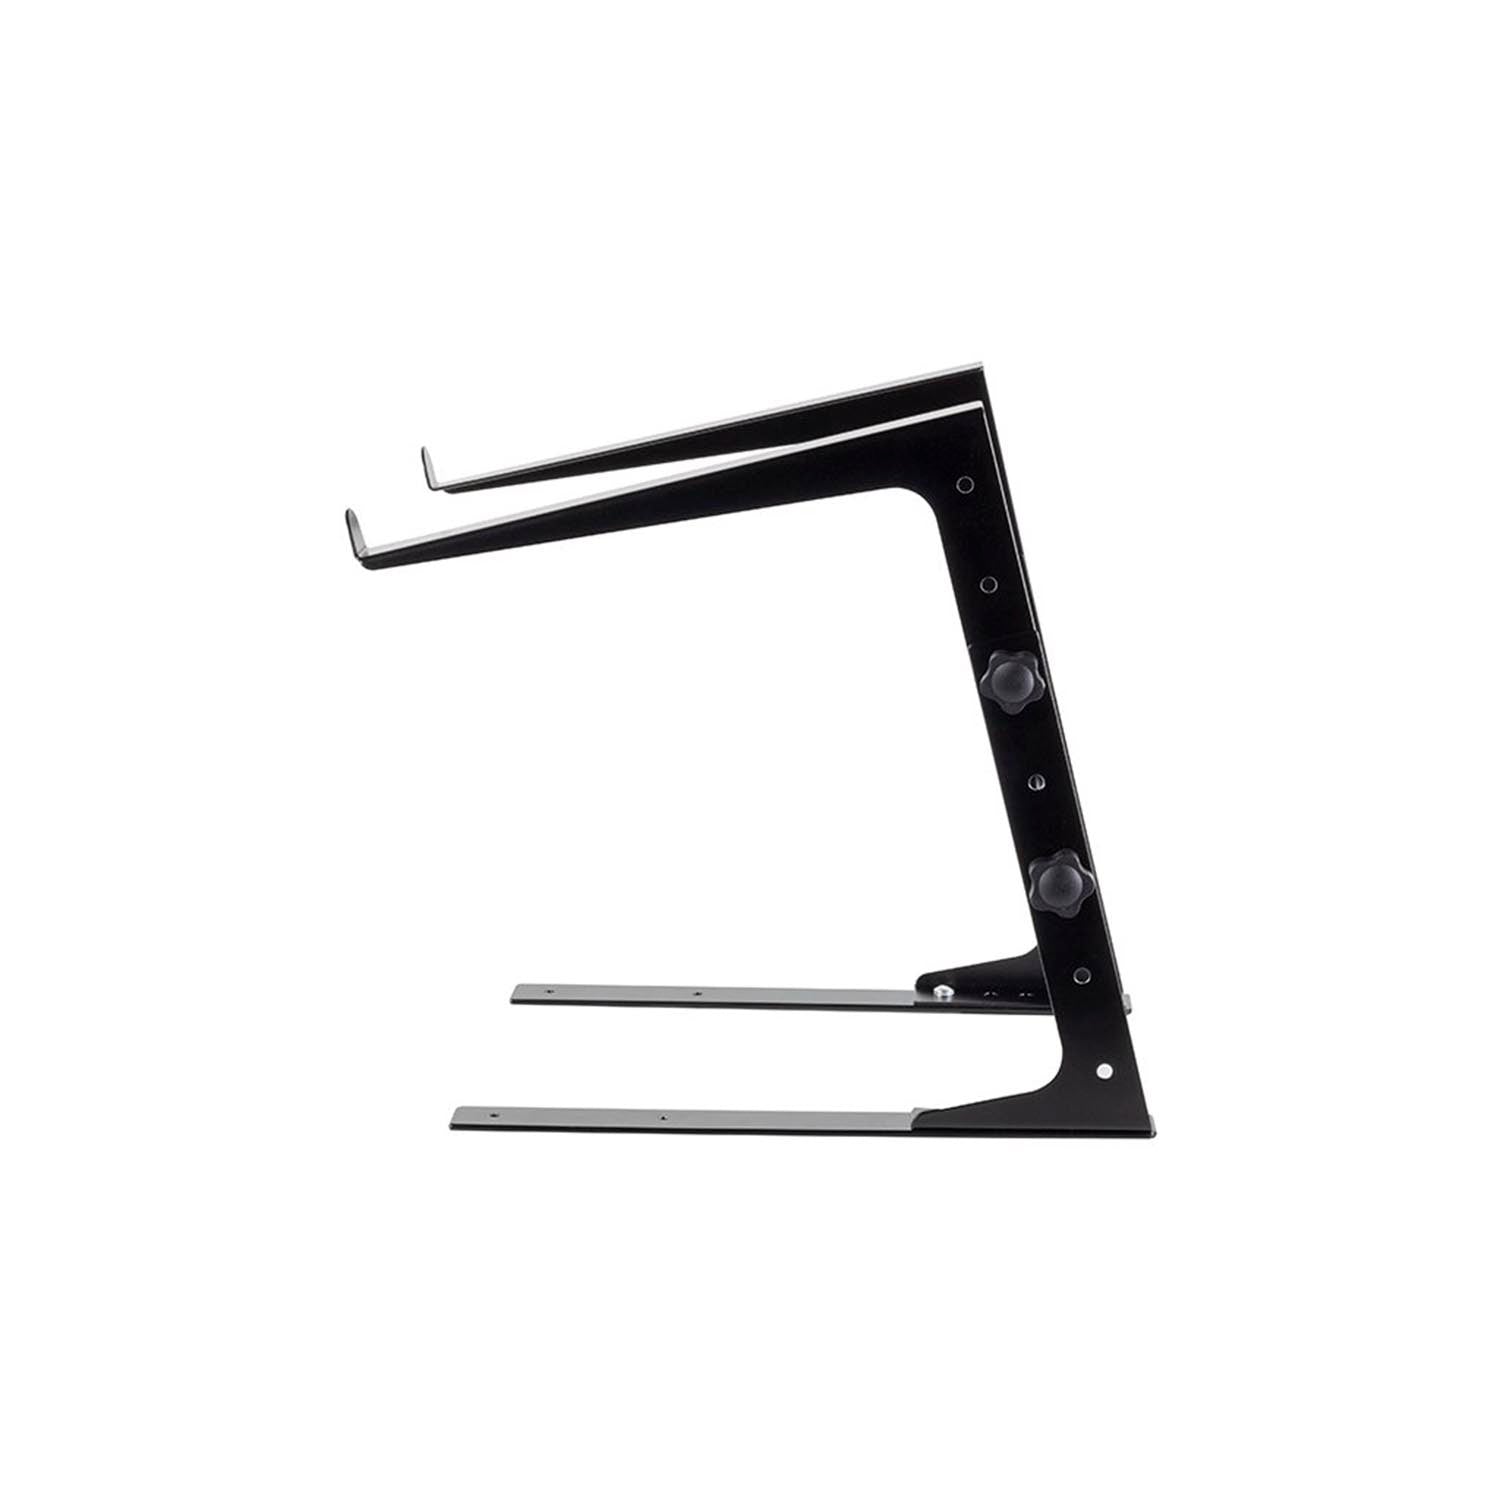 B-Stock: Headliner HL20001 Highland Laptop Stand With 3 Different Mounting Options - Hollywood DJ